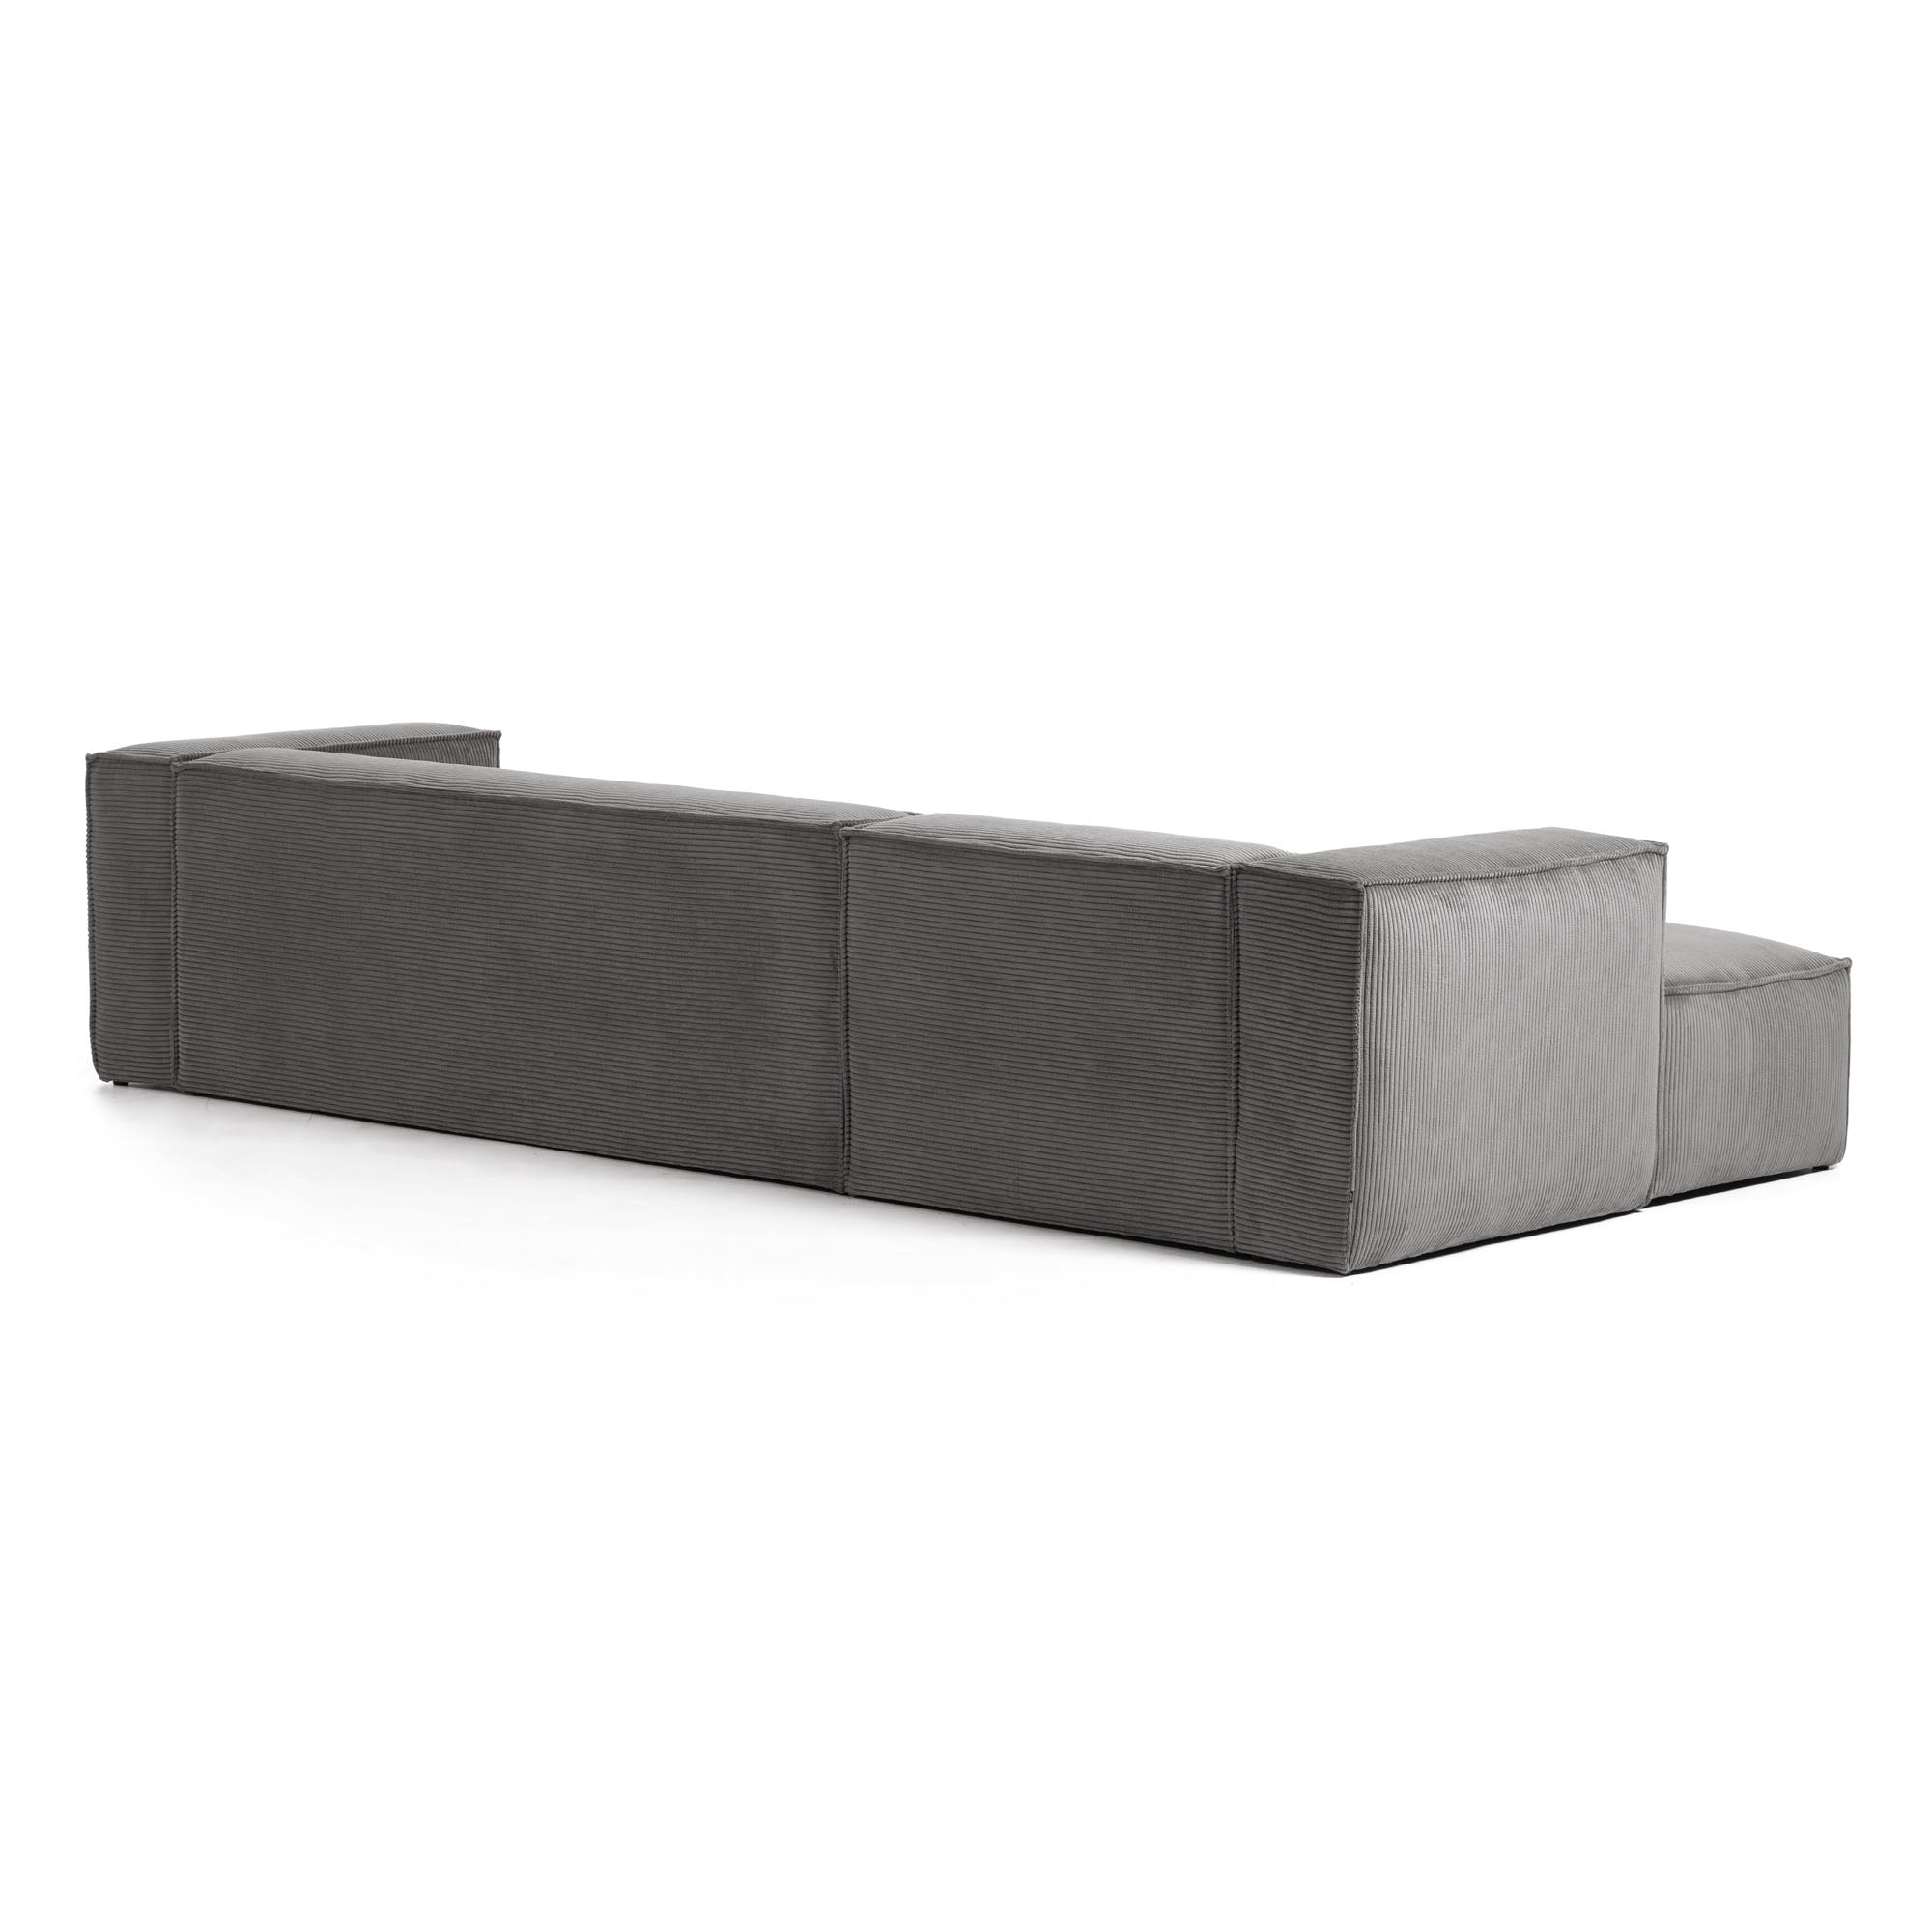 Blok 4 seater sofa with left side chaise longue in grey wide seam corduroy, 330 cm